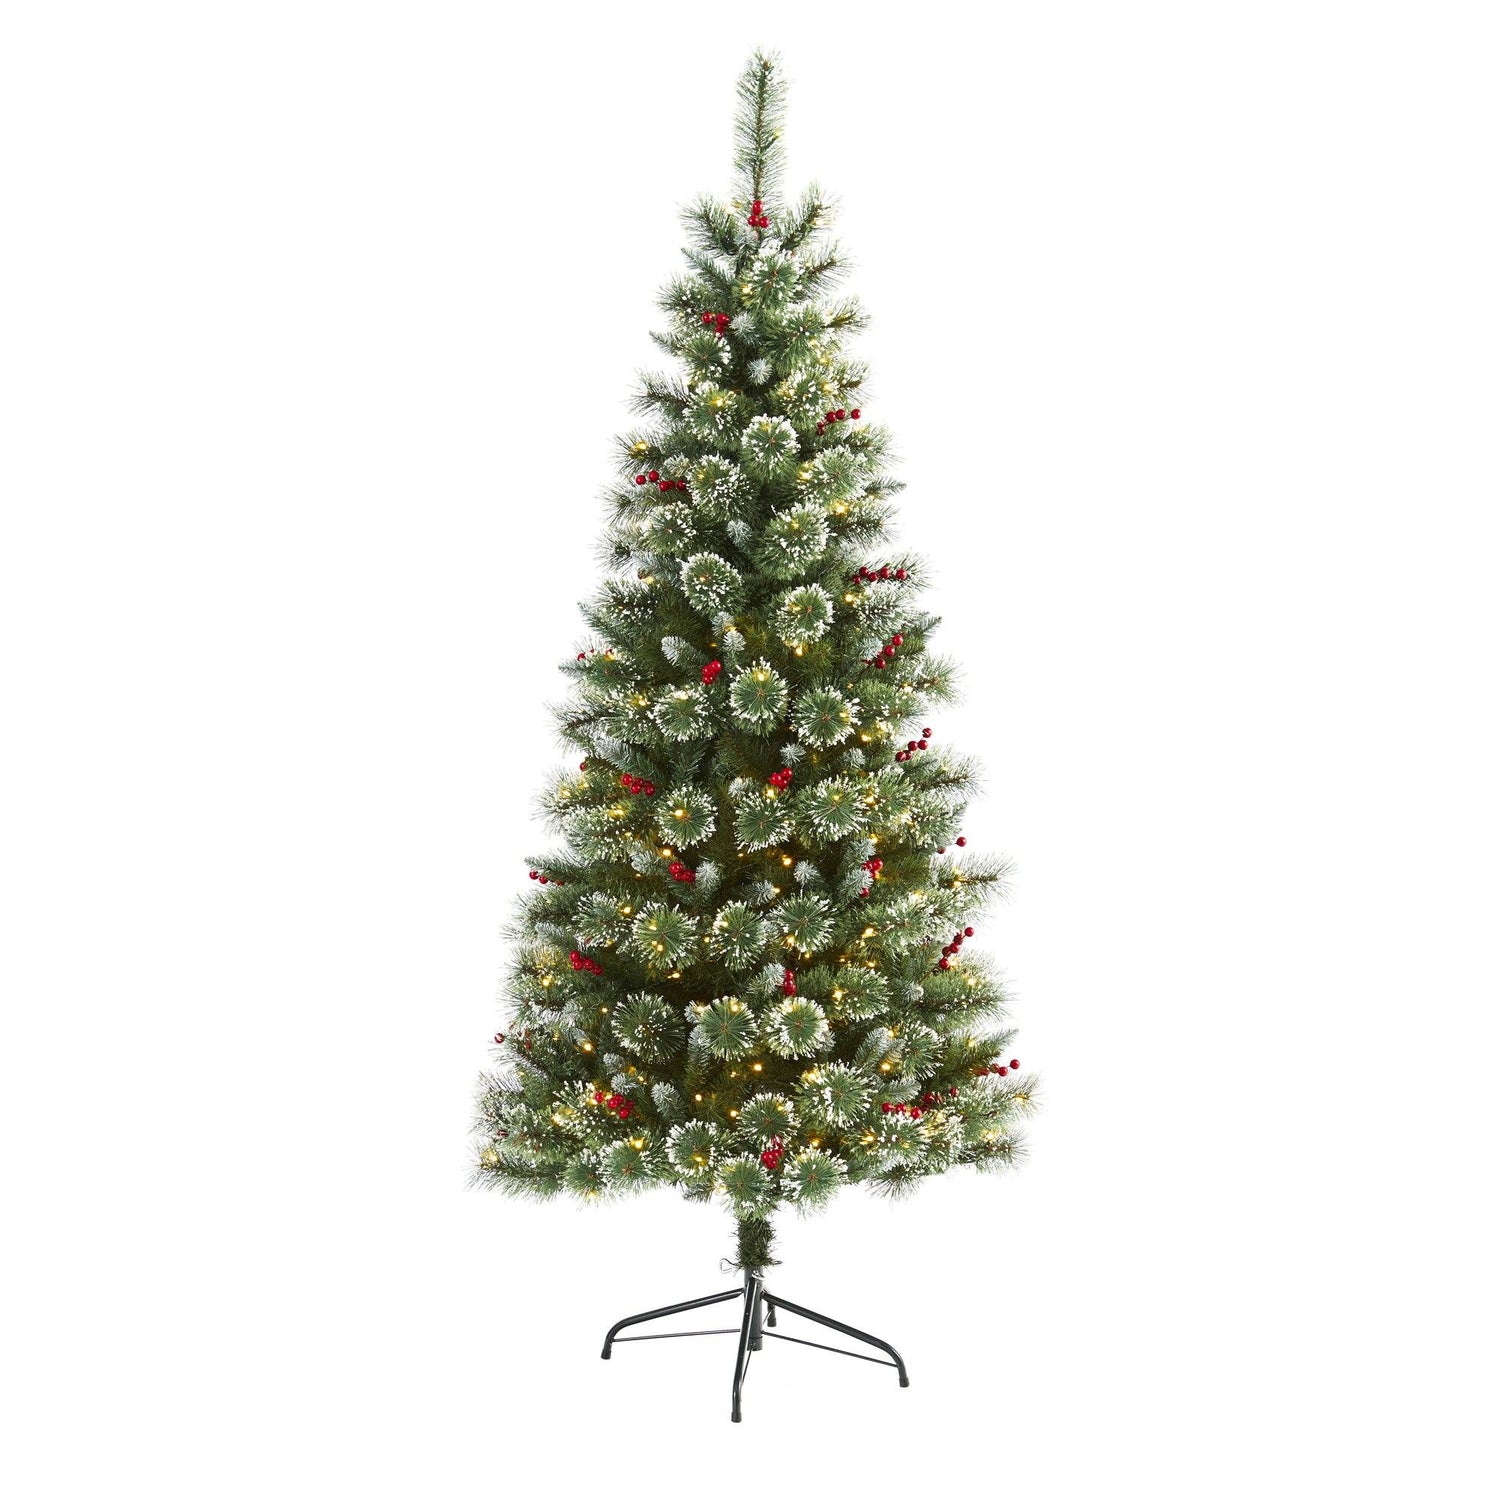 6’ Frosted Swiss Pine Artificial Christmas Tree with 300 Clear LED Lights and Berries